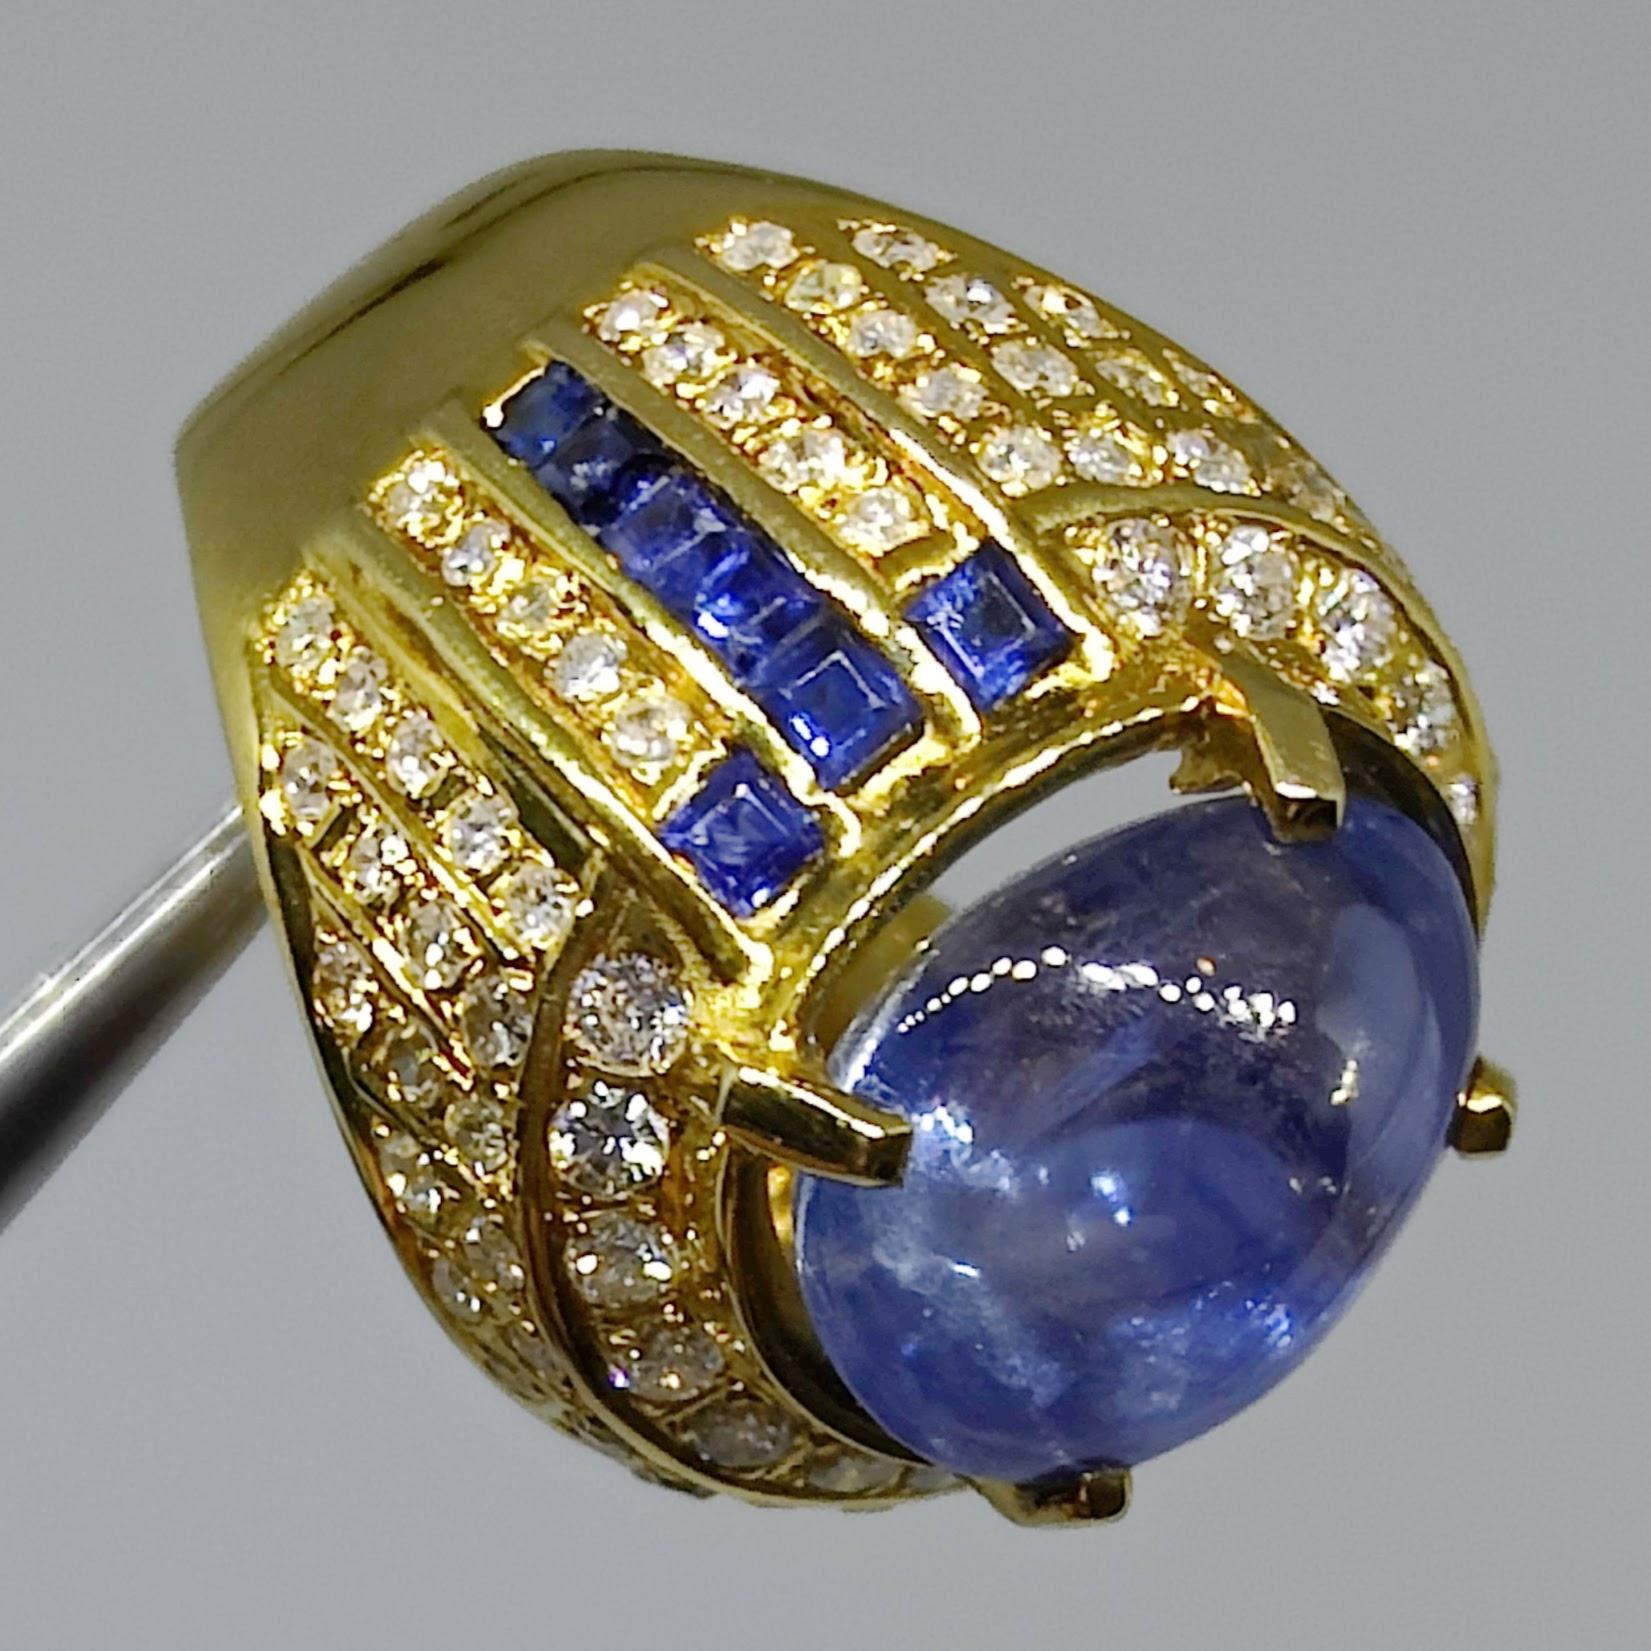 Vintage Art Deco 8.82ct Cabochon Blue Sapphire Diamond Men's Ring in 20K Gold In New Condition For Sale In Wan Chai District, HK